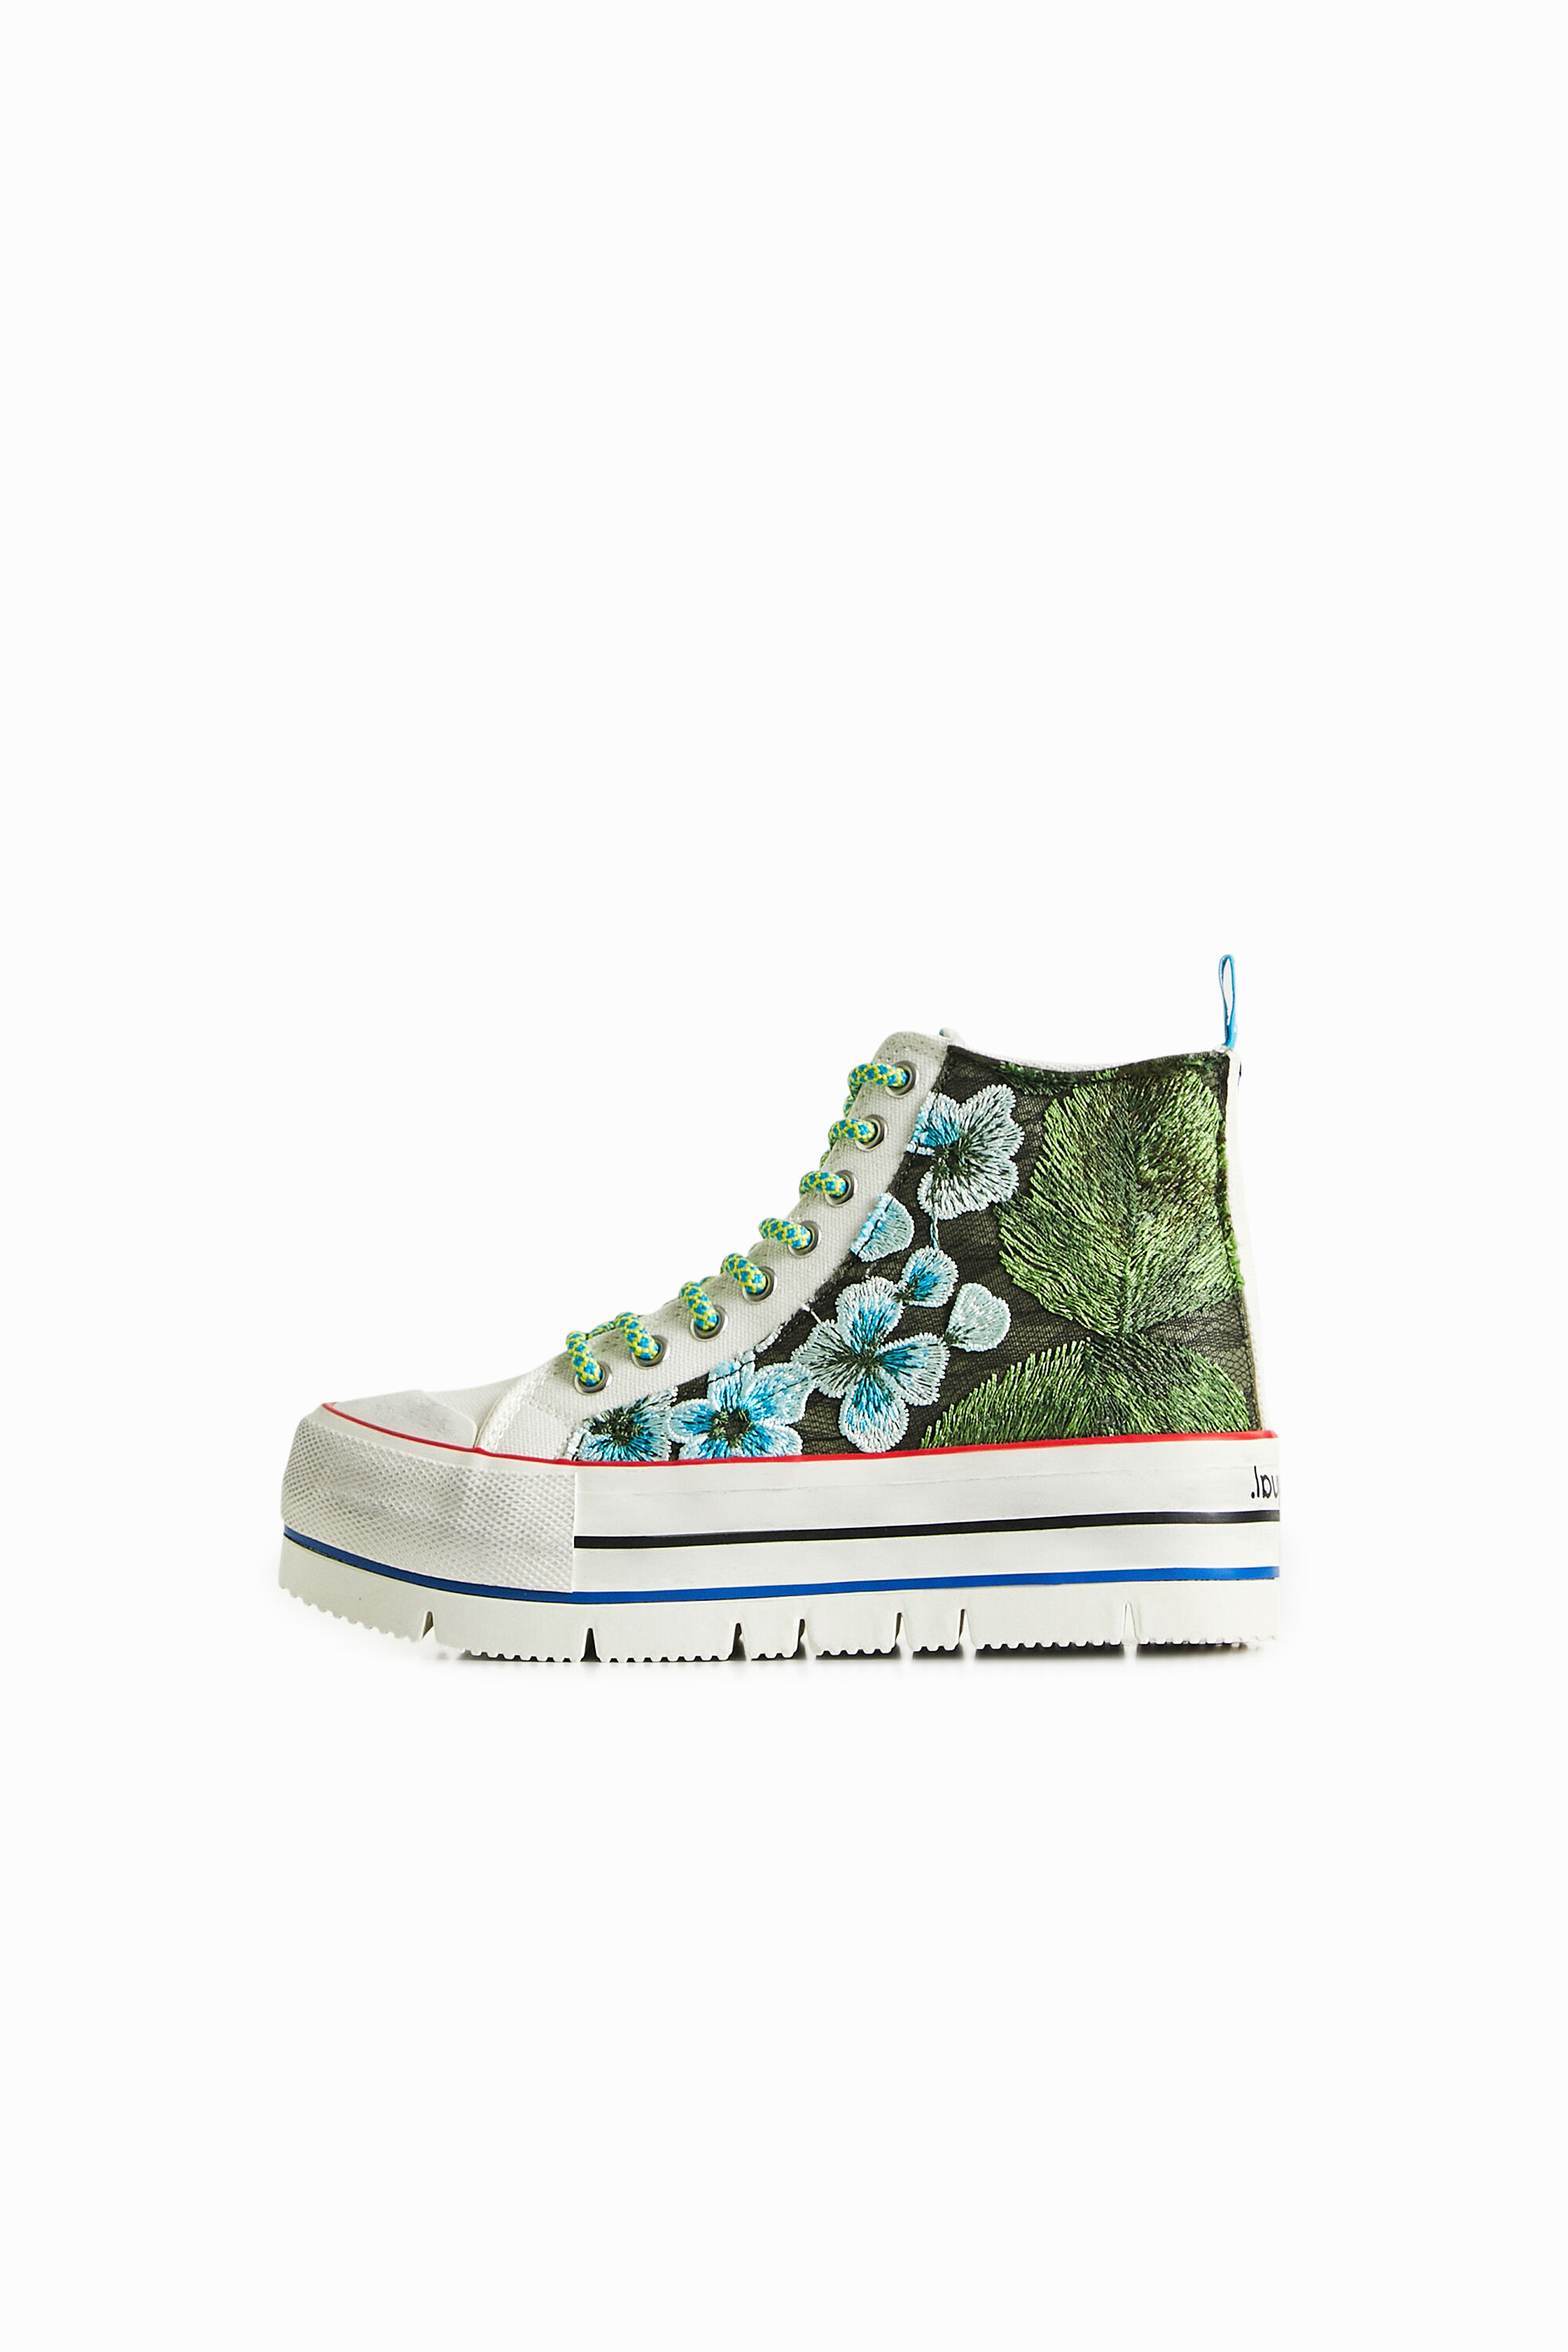 Floral patchwork high-top sneakers - MATERIAL FINISHES - 36